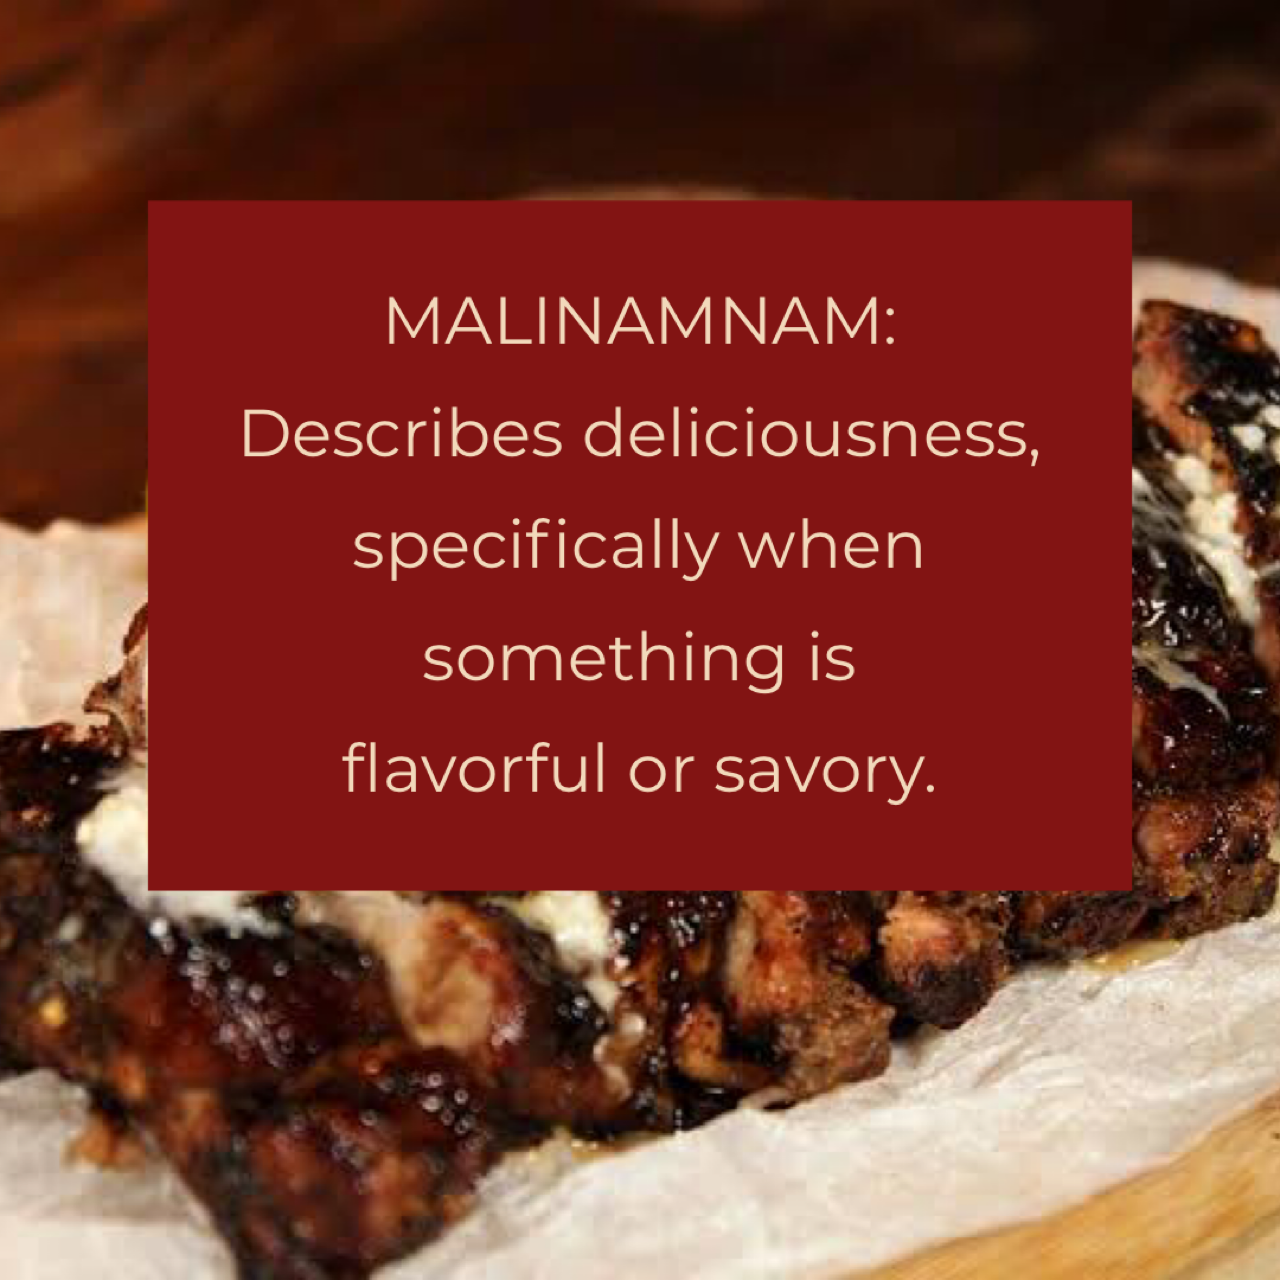 Malinamnam: Describes deliciousness, specifically when something is flavorful or savory